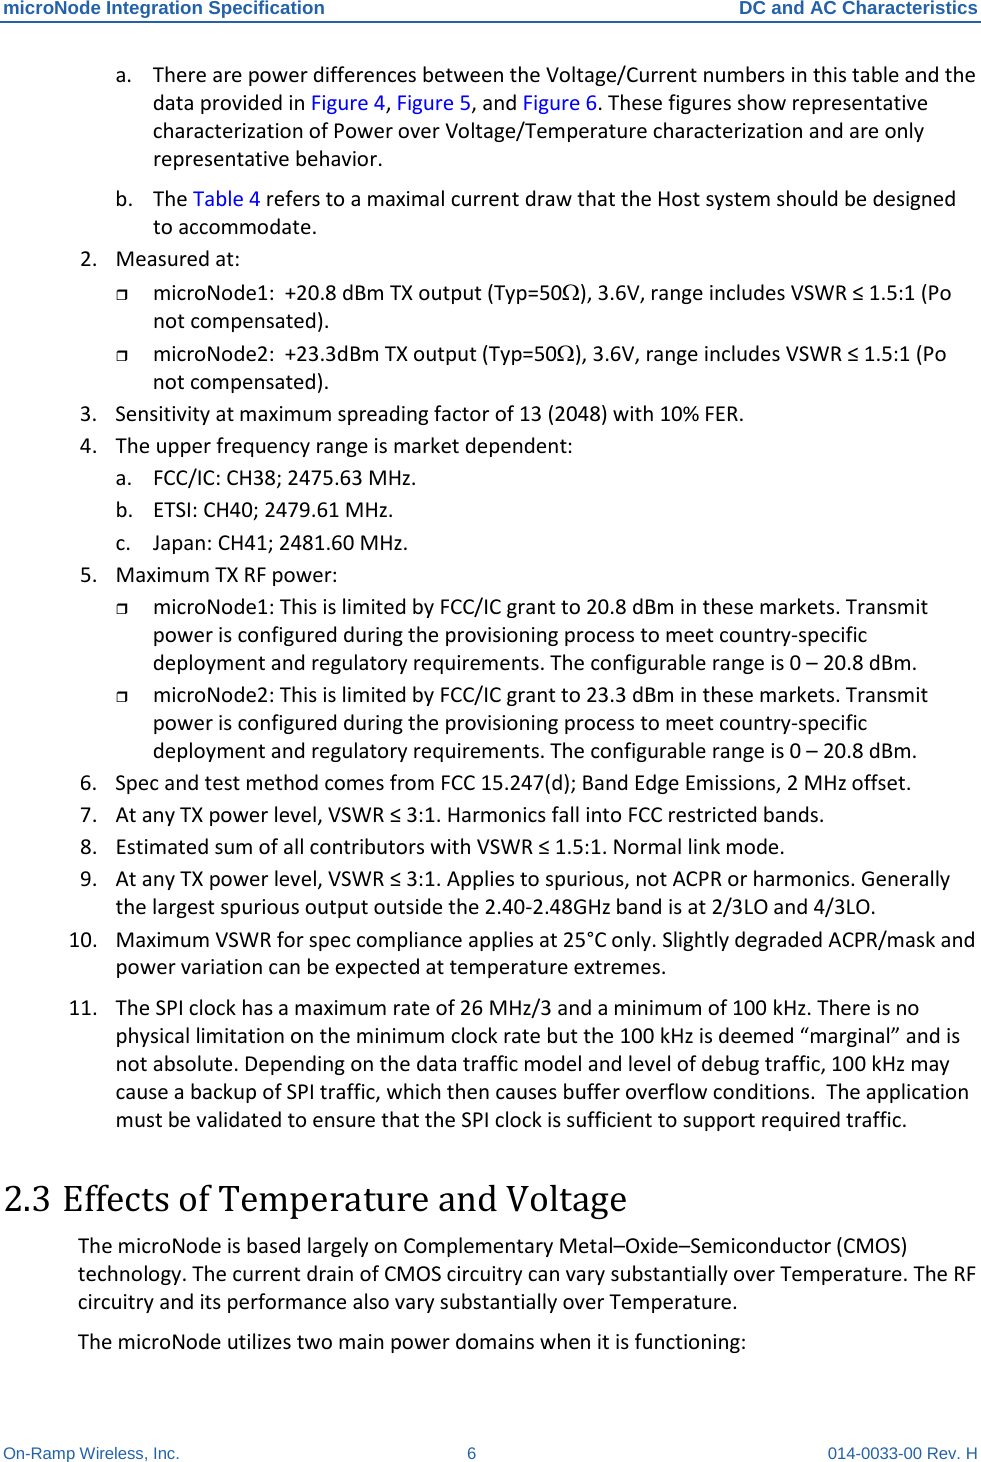 microNode Integration Specification DC and AC Characteristics On-Ramp Wireless, Inc.  6  014-0033-00 Rev. H a. There are power differences between the Voltage/Current numbers in this table and the data provided in Figure 4, Figure 5, and Figure 6. These figures show representative characterization of Power over Voltage/Temperature characterization and are only representative behavior. b. The Table 4 refers to a maximal current draw that the Host system should be designed to accommodate. 2. Measured at:  microNode1:  +20.8 dBm TX output (Typ=50Ω), 3.6V, range includes VSWR ≤ 1.5:1 (Po not compensated).  microNode2:  +23.3dBm TX output (Typ=50Ω), 3.6V, range includes VSWR ≤ 1.5:1 (Po not compensated). 3. Sensitivity at maximum spreading factor of 13 (2048) with 10% FER. 4. The upper frequency range is market dependent: a. FCC/IC: CH38; 2475.63 MHz. b. ETSI: CH40; 2479.61 MHz. c. Japan: CH41; 2481.60 MHz. 5. Maximum TX RF power:  microNode1: This is limited by FCC/IC grant to 20.8 dBm in these markets. Transmit power is configured during the provisioning process to meet country-specific deployment and regulatory requirements. The configurable range is 0 – 20.8 dBm.  microNode2: This is limited by FCC/IC grant to 23.3 dBm in these markets. Transmit power is configured during the provisioning process to meet country-specific deployment and regulatory requirements. The configurable range is 0 – 20.8 dBm. 6. Spec and test method comes from FCC 15.247(d); Band Edge Emissions, 2 MHz offset. 7. At any TX power level, VSWR ≤ 3:1. Harmonics fall into FCC restricted bands. 8. Estimated sum of all contributors with VSWR ≤ 1.5:1. Normal link mode. 9. At any TX power level, VSWR ≤ 3:1. Applies to spurious, not ACPR or harmonics. Generally the largest spurious output outside the 2.40-2.48GHz band is at 2/3LO and 4/3LO. 10. Maximum VSWR for spec compliance applies at 25°C only. Slightly degraded ACPR/mask and power variation can be expected at temperature extremes. 11. The SPI clock has a maximum rate of 26 MHz/3 and a minimum of 100 kHz. There is no physical limitation on the minimum clock rate but the 100 kHz is deemed “marginal” and is not absolute. Depending on the data traffic model and level of debug traffic, 100 kHz may cause a backup of SPI traffic, which then causes buffer overflow conditions.  The application must be validated to ensure that the SPI clock is sufficient to support required traffic. 2.3 Effects of Temperature and Voltage The microNode is based largely on Complementary Metal–Oxide–Semiconductor (CMOS) technology. The current drain of CMOS circuitry can vary substantially over Temperature. The RF circuitry and its performance also vary substantially over Temperature.  The microNode utilizes two main power domains when it is functioning: 